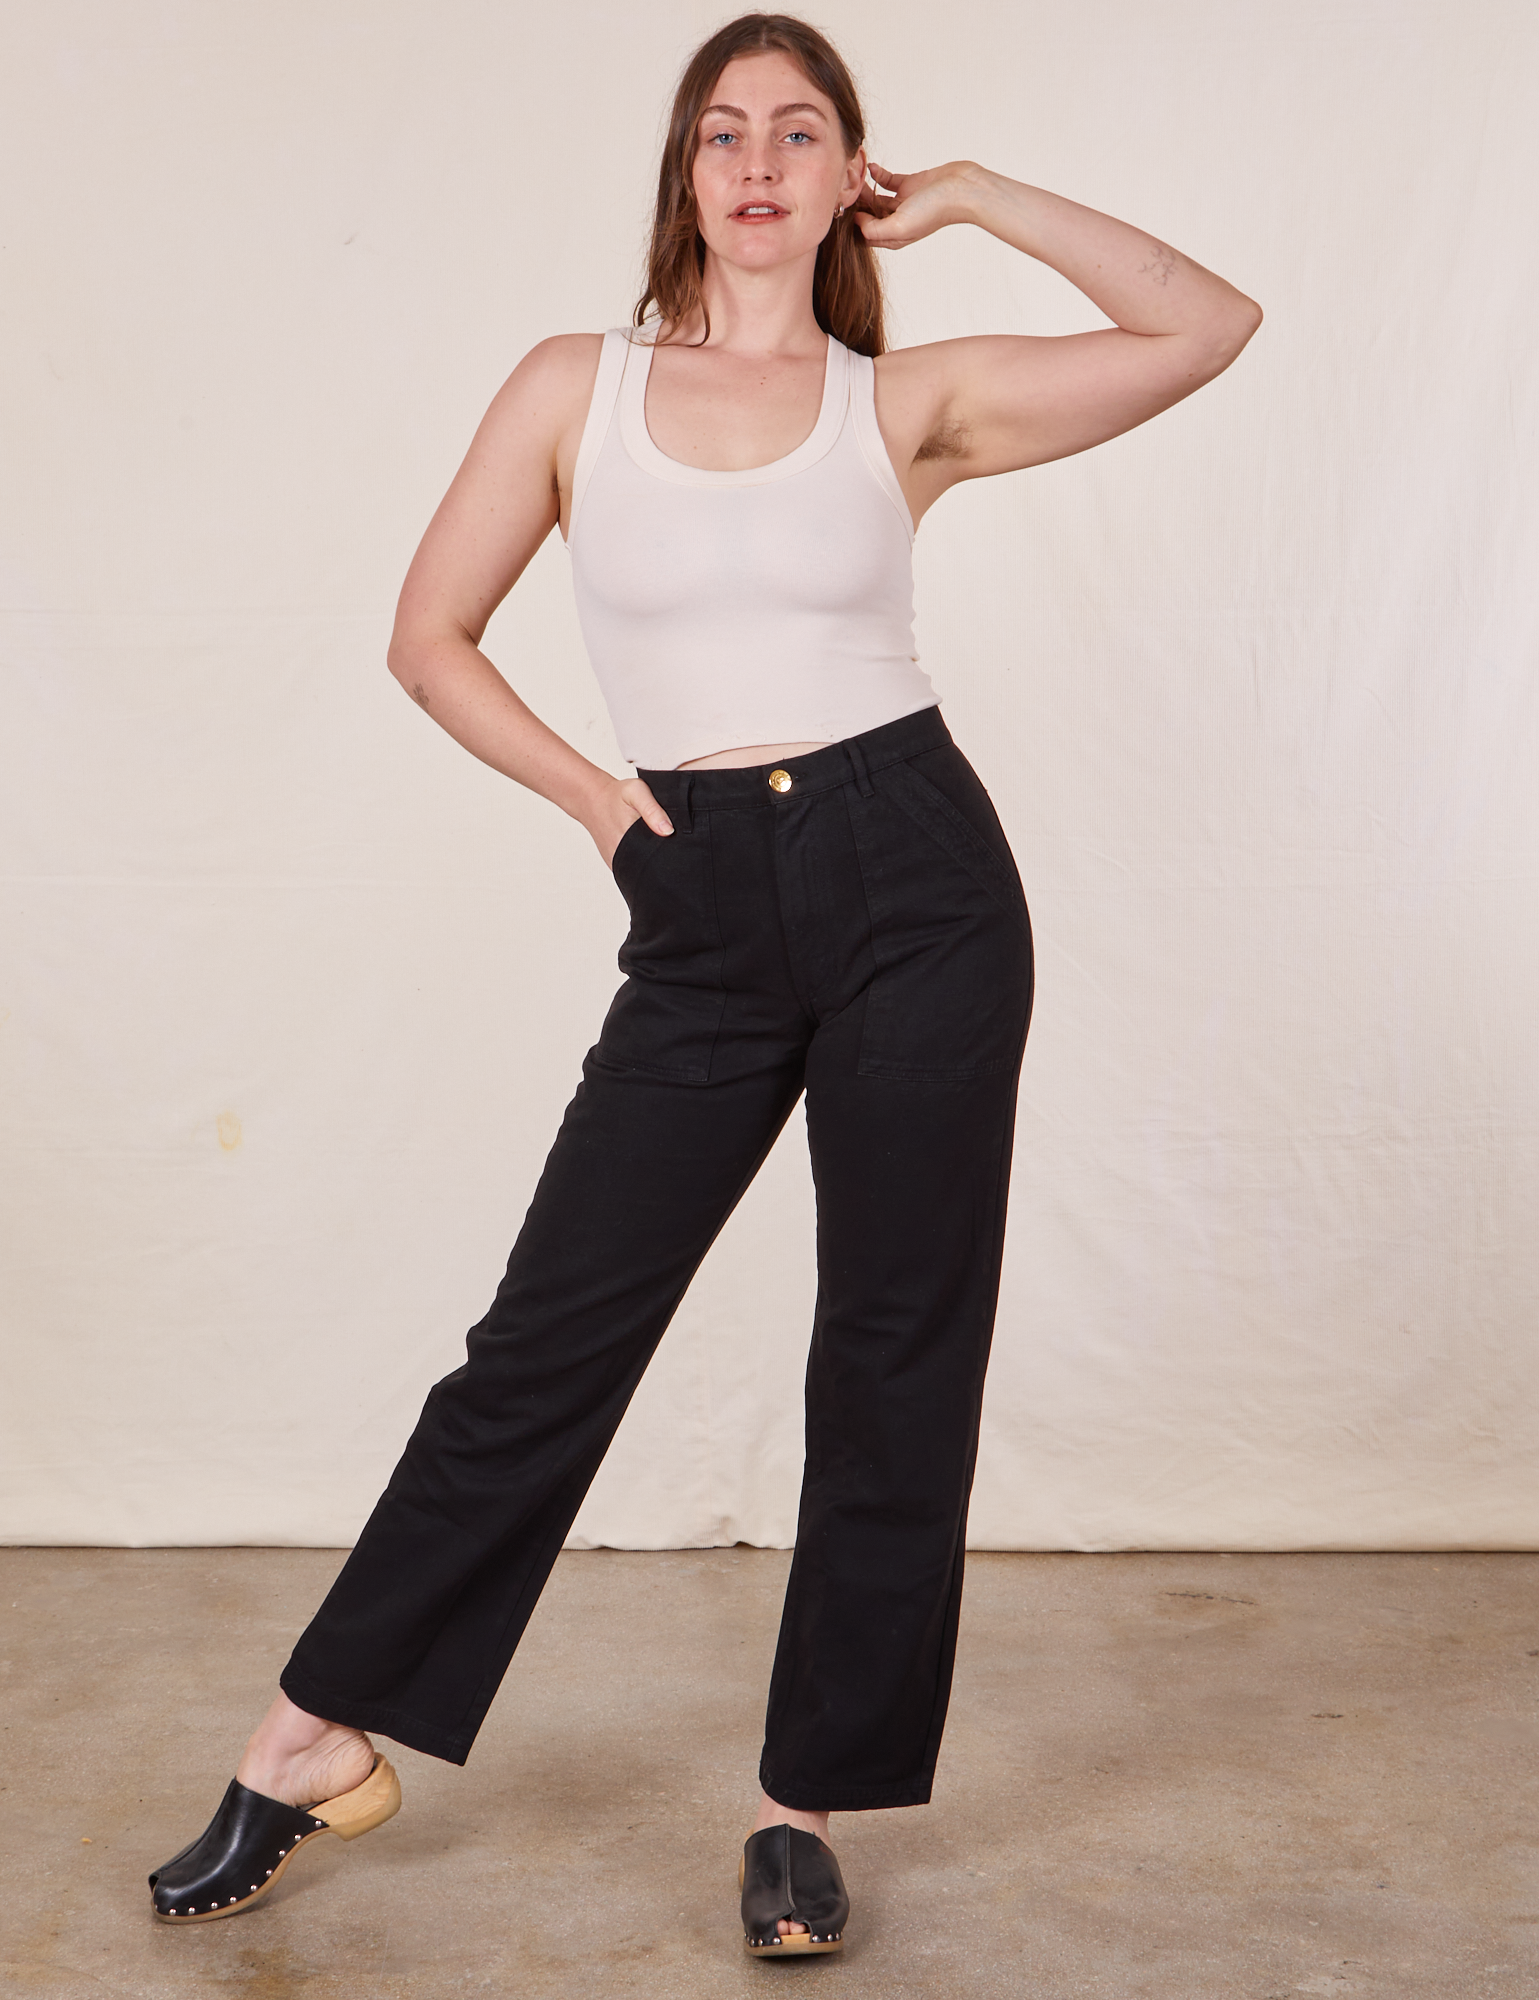 Allison is 5&#39;10&quot; and wearing Long S Work Pants in Basic Black paired with Tank Top in vintage tee off-white